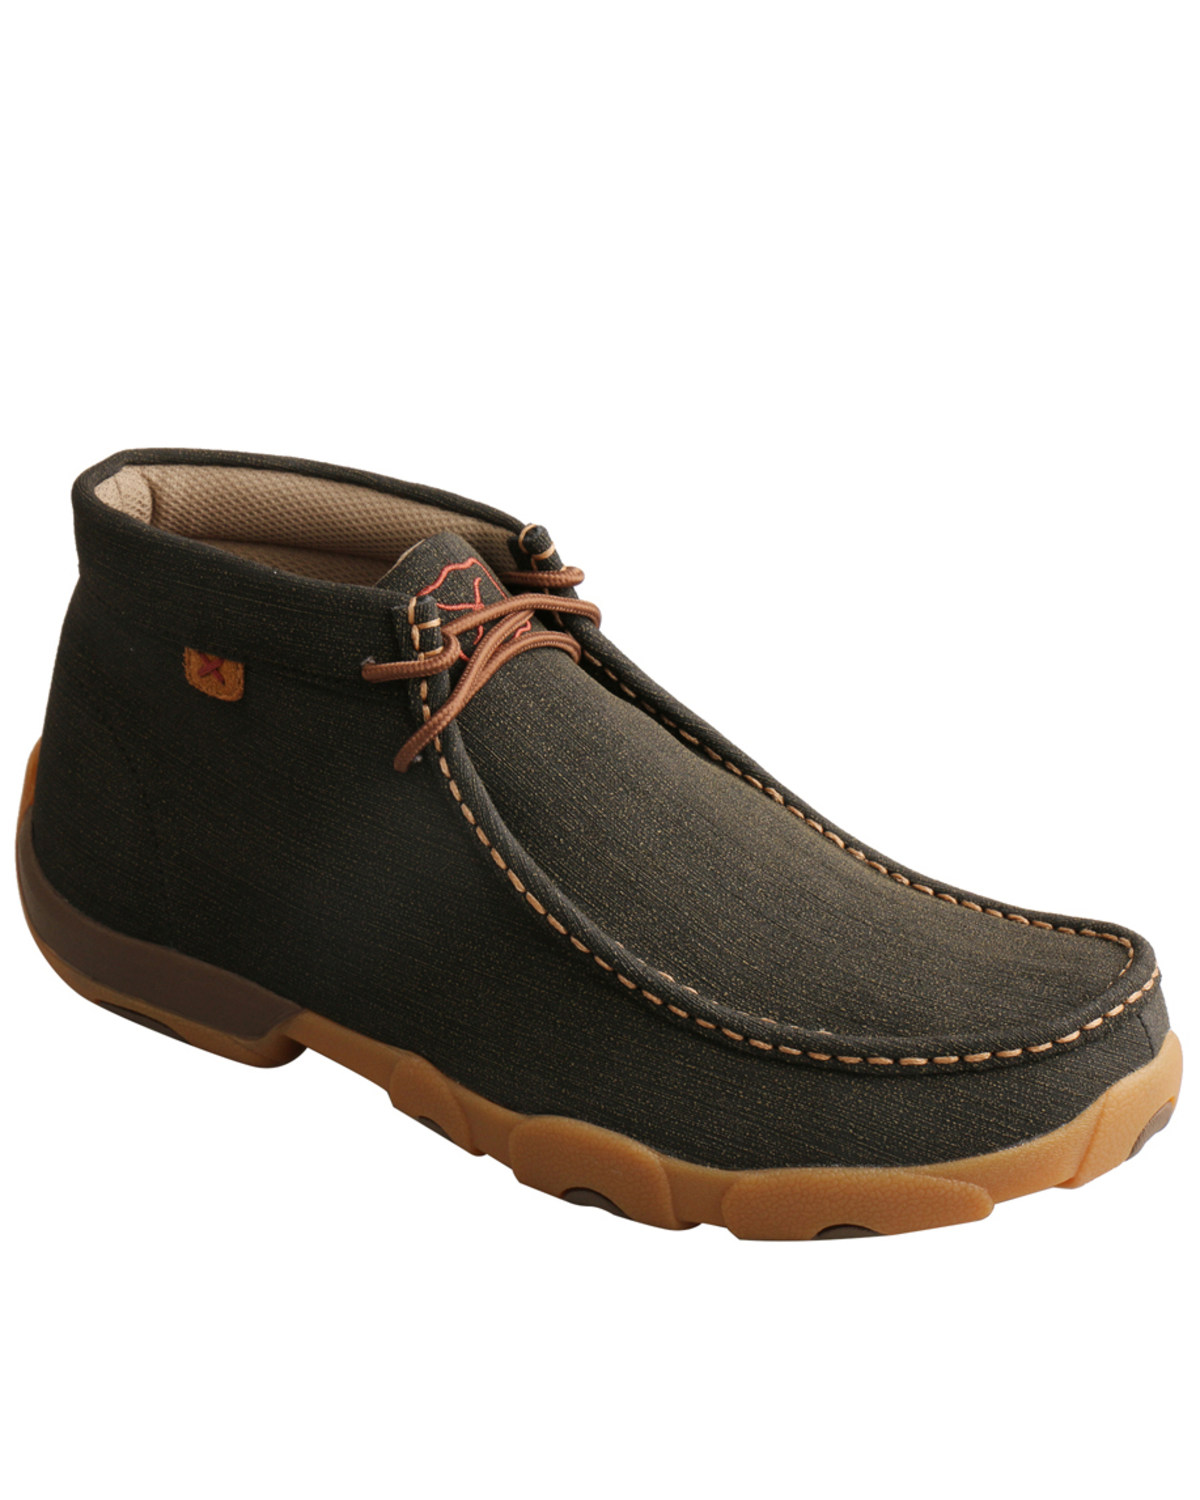 Twisted X Men's Work Chukka Driving Shoes - Steel Toe